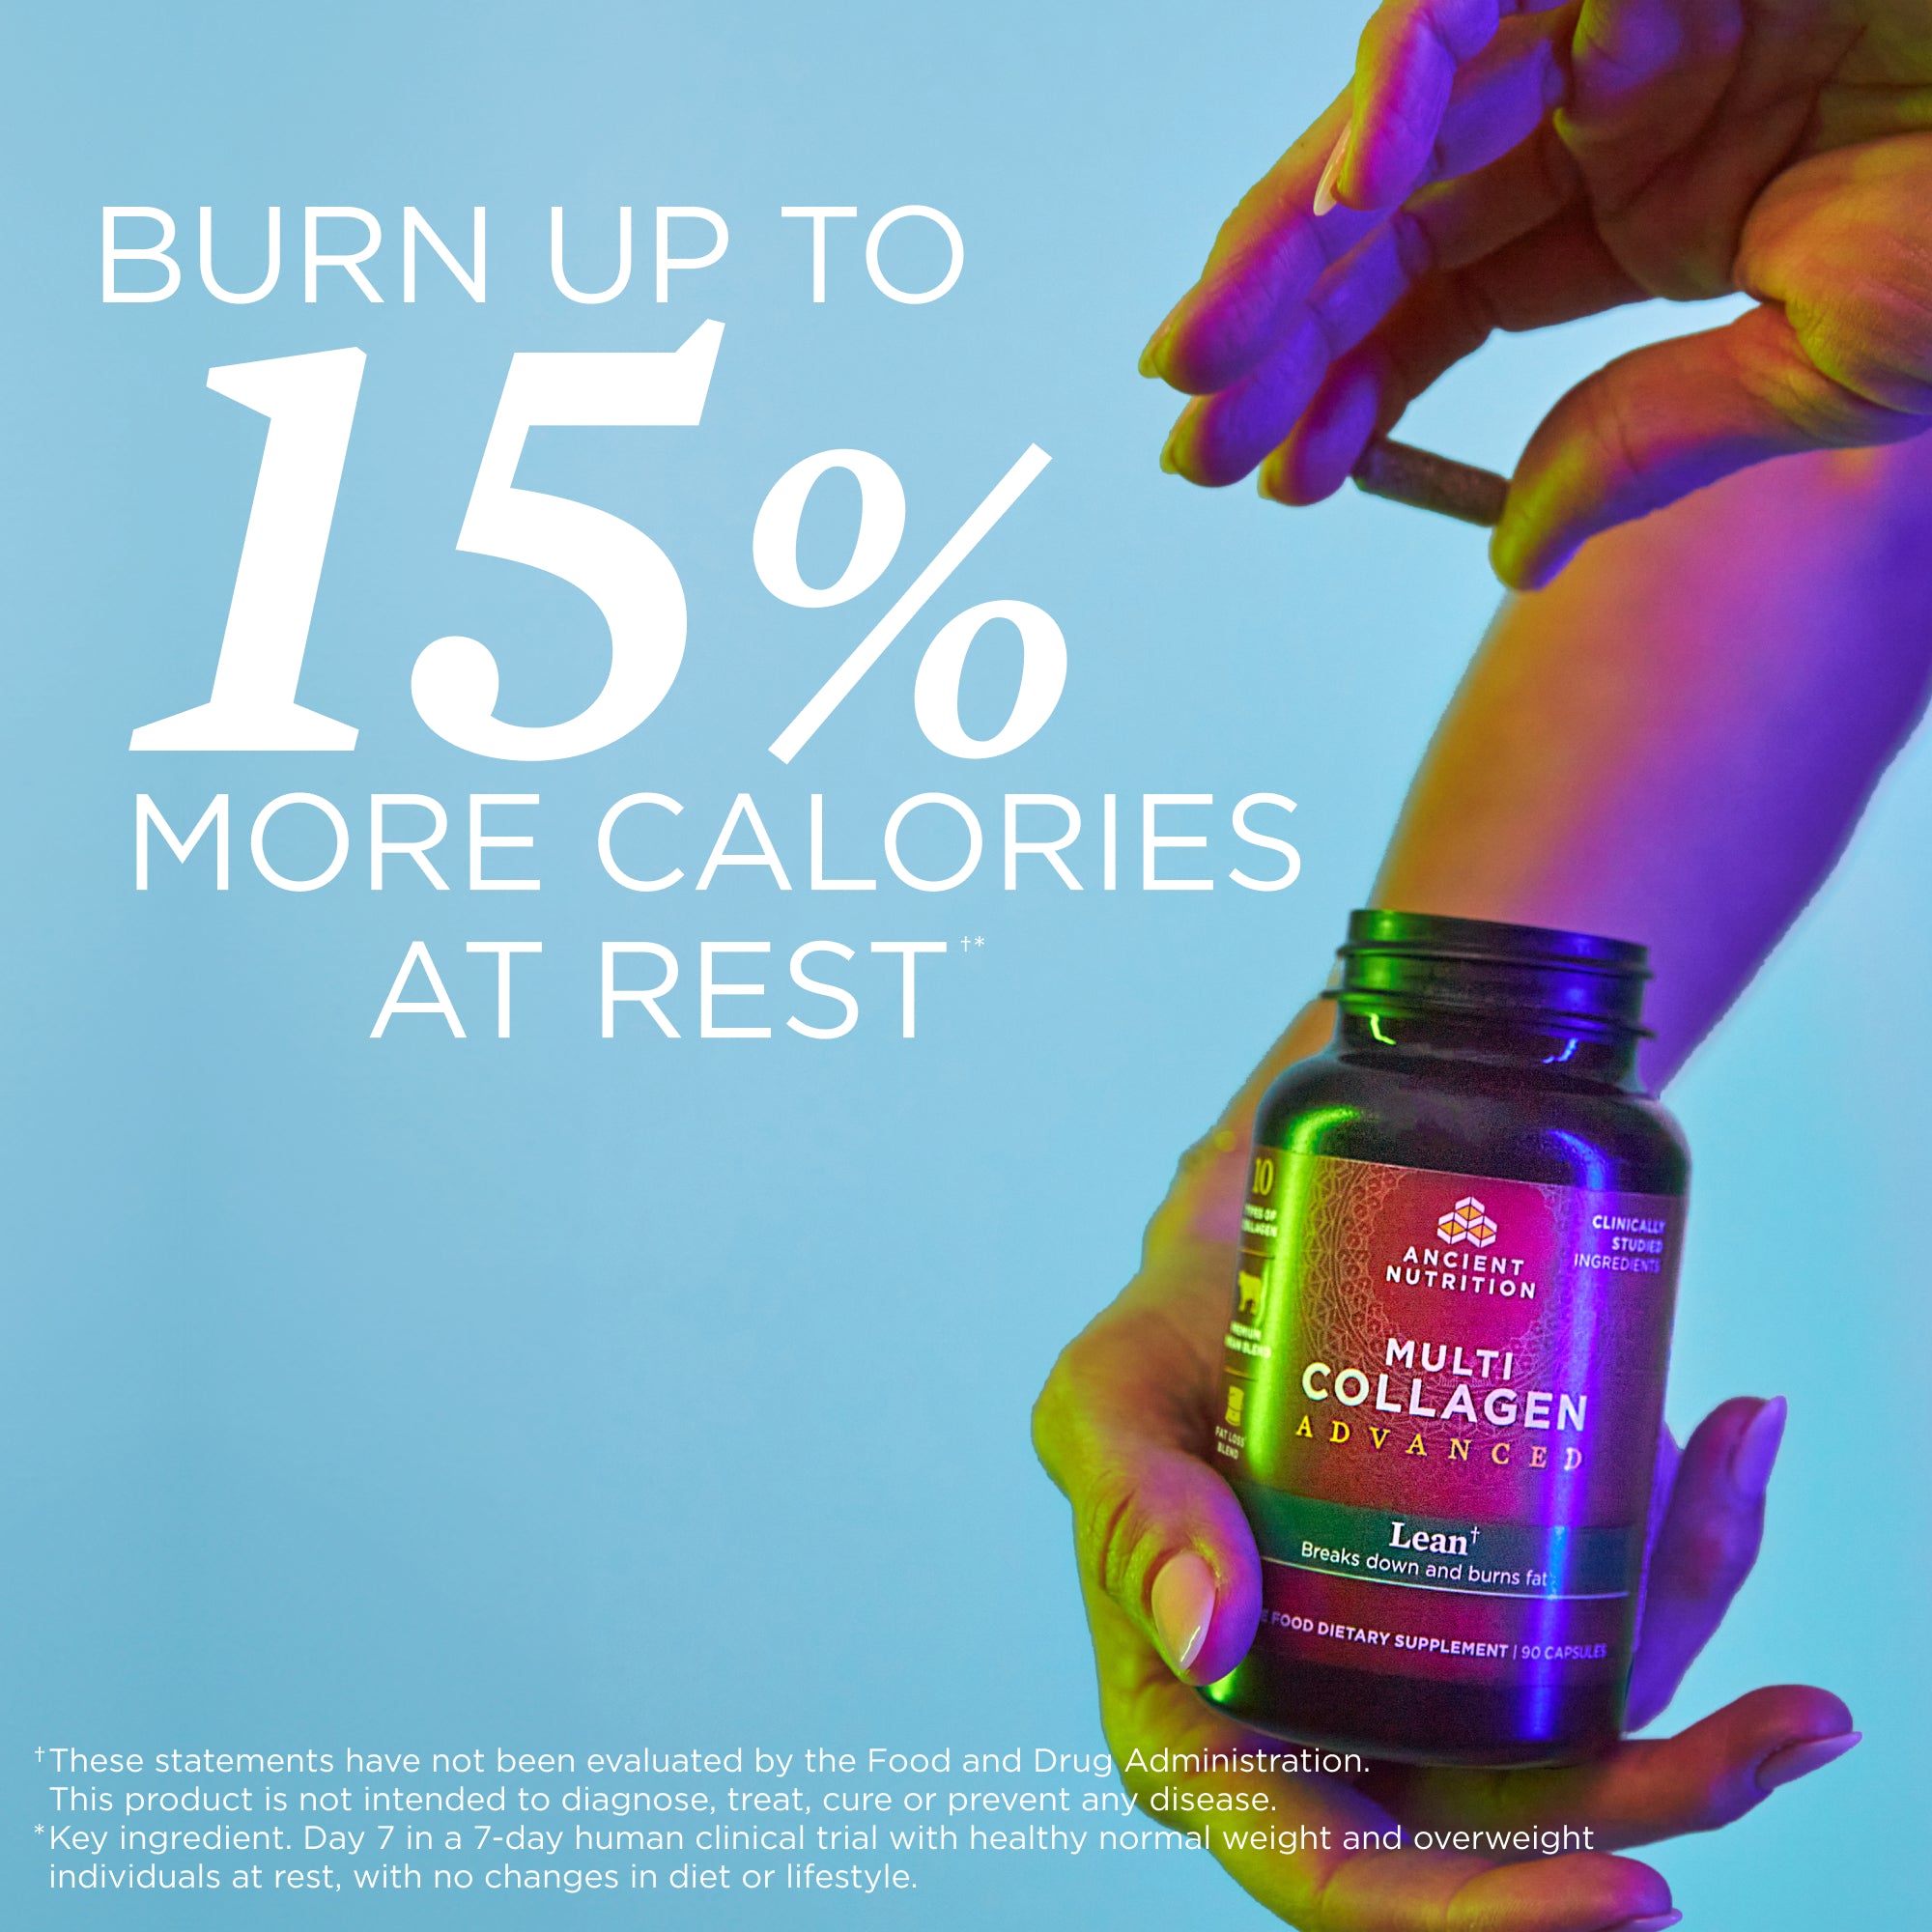 burn up to 15% more calories at rest